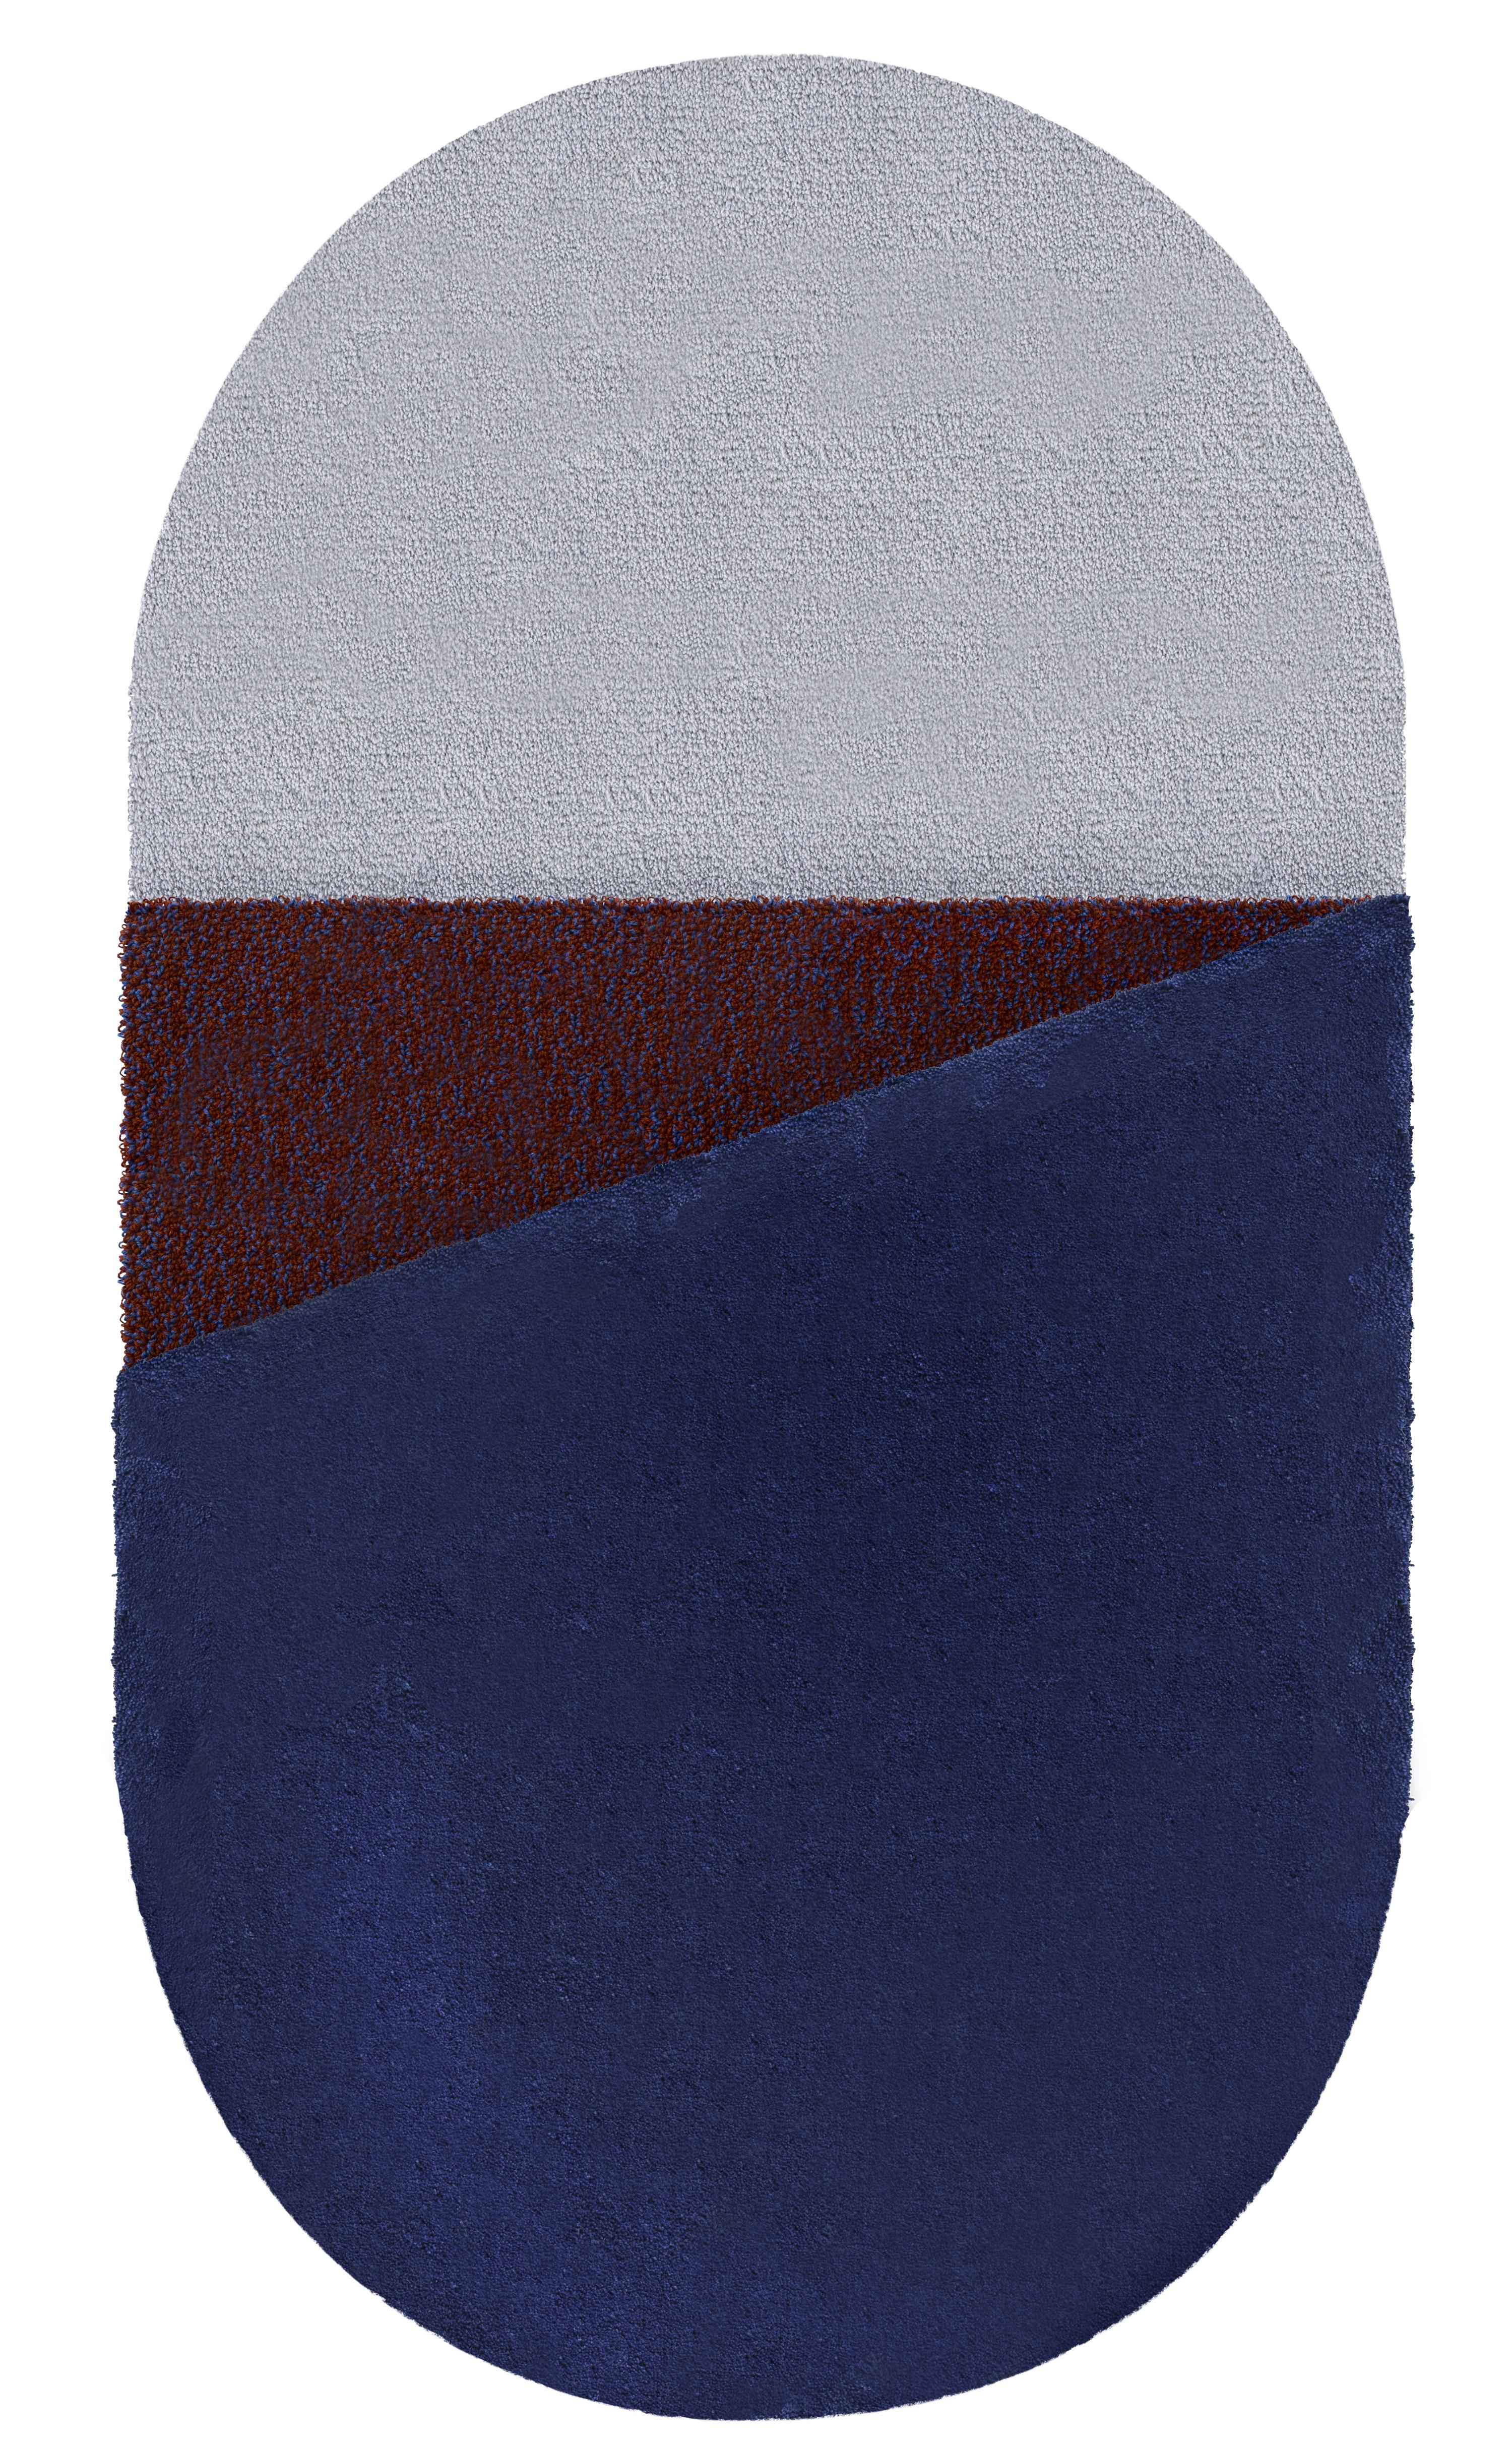 Medium blue oci right rug by Seraina Lareida
Dimensions: W 110 x H 200 cm 
Materials: 100% New Zeland top-quality wool.
Available in sizes Small or Large. Also available in colors: Brick/Pink, Yellow/Gray, Brick/Pink, Bordeaux/Ecru and,